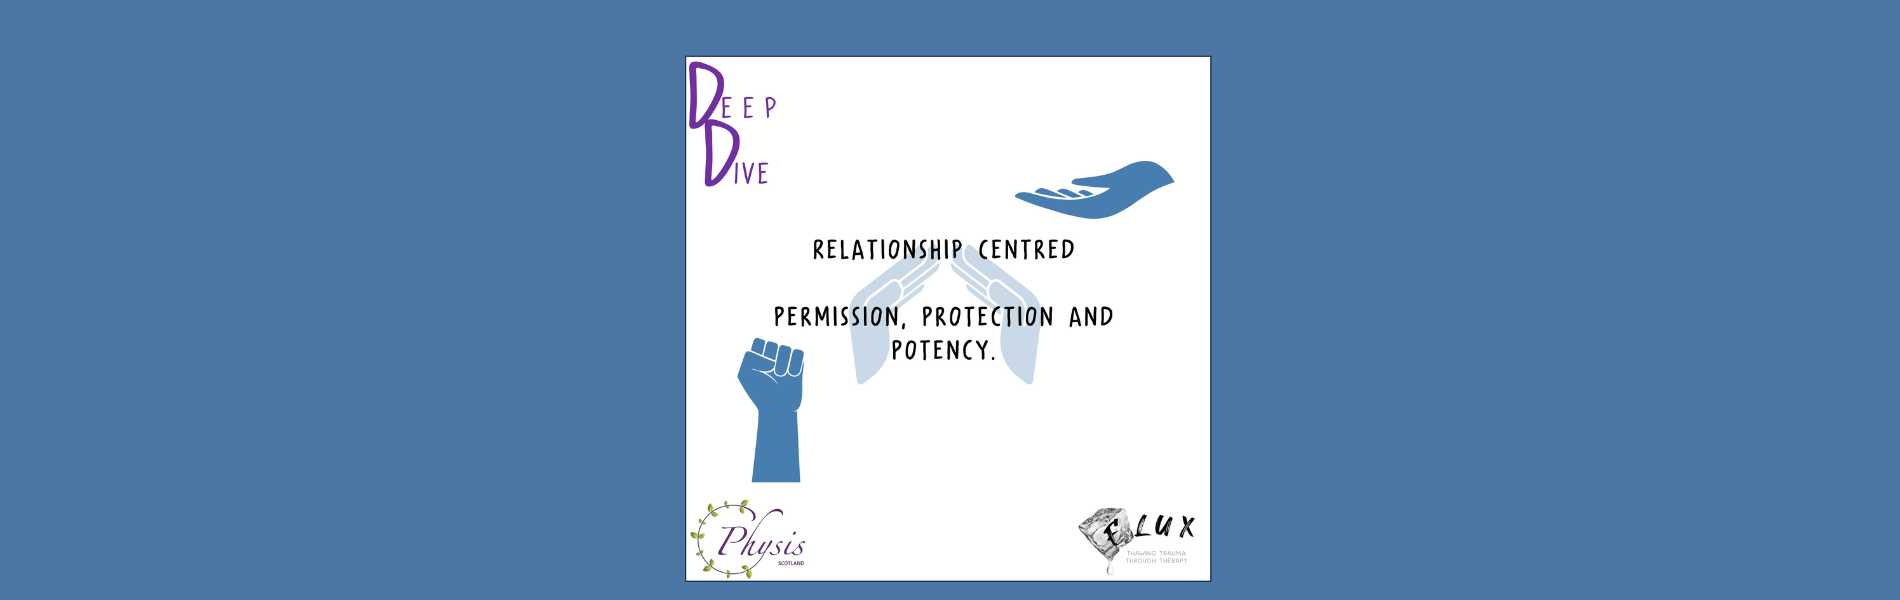 Relationship Centred Permission, Protection and Potency